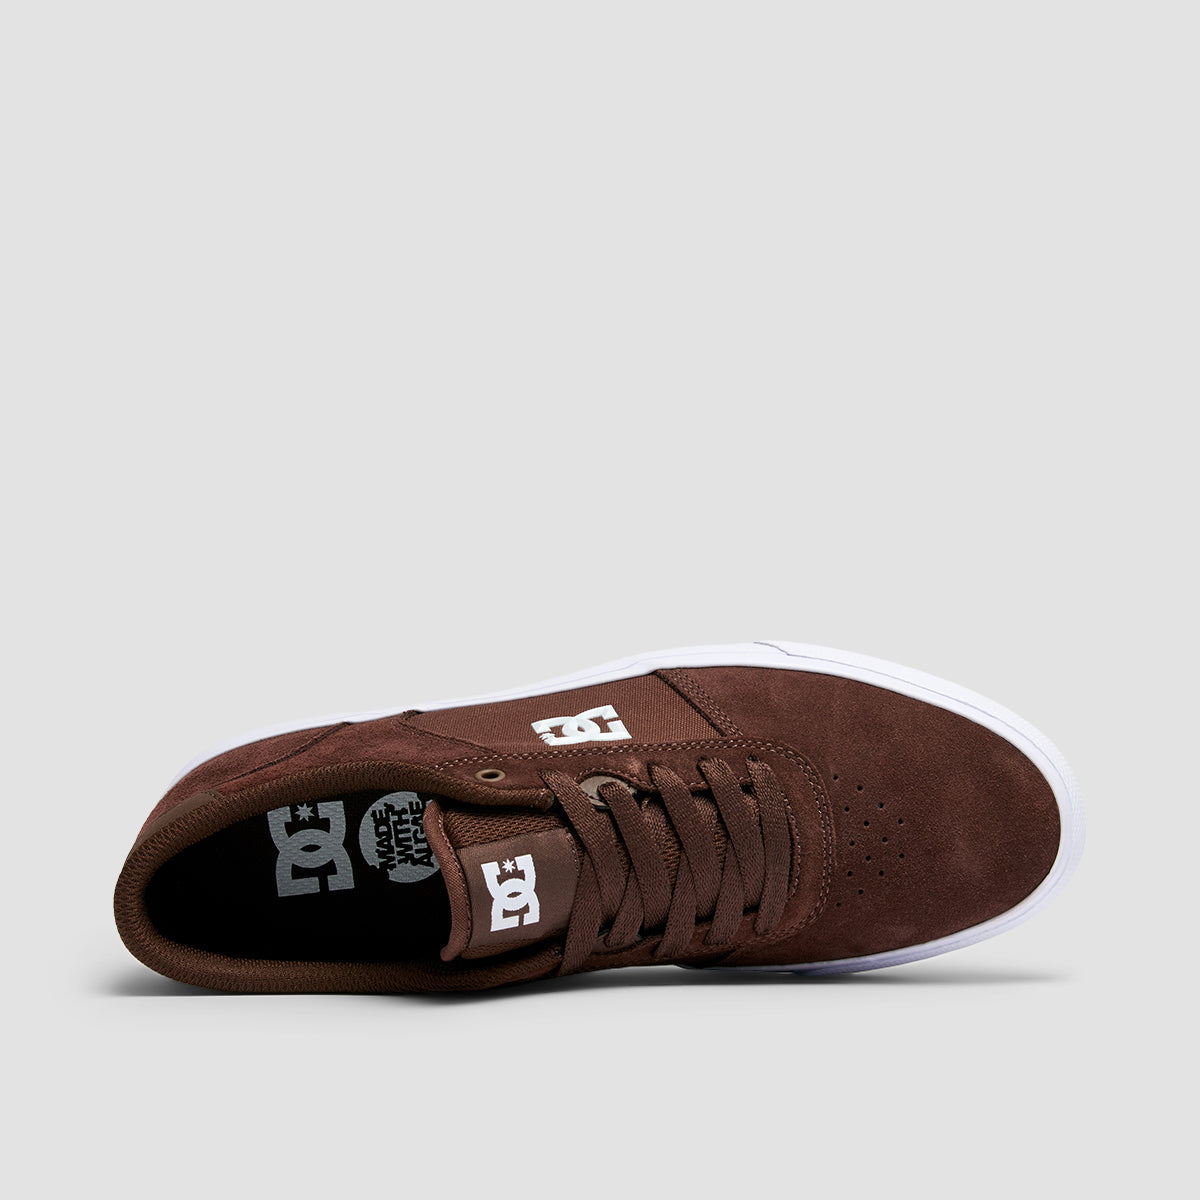 DC Teknic Shoes - Chocolate Brown